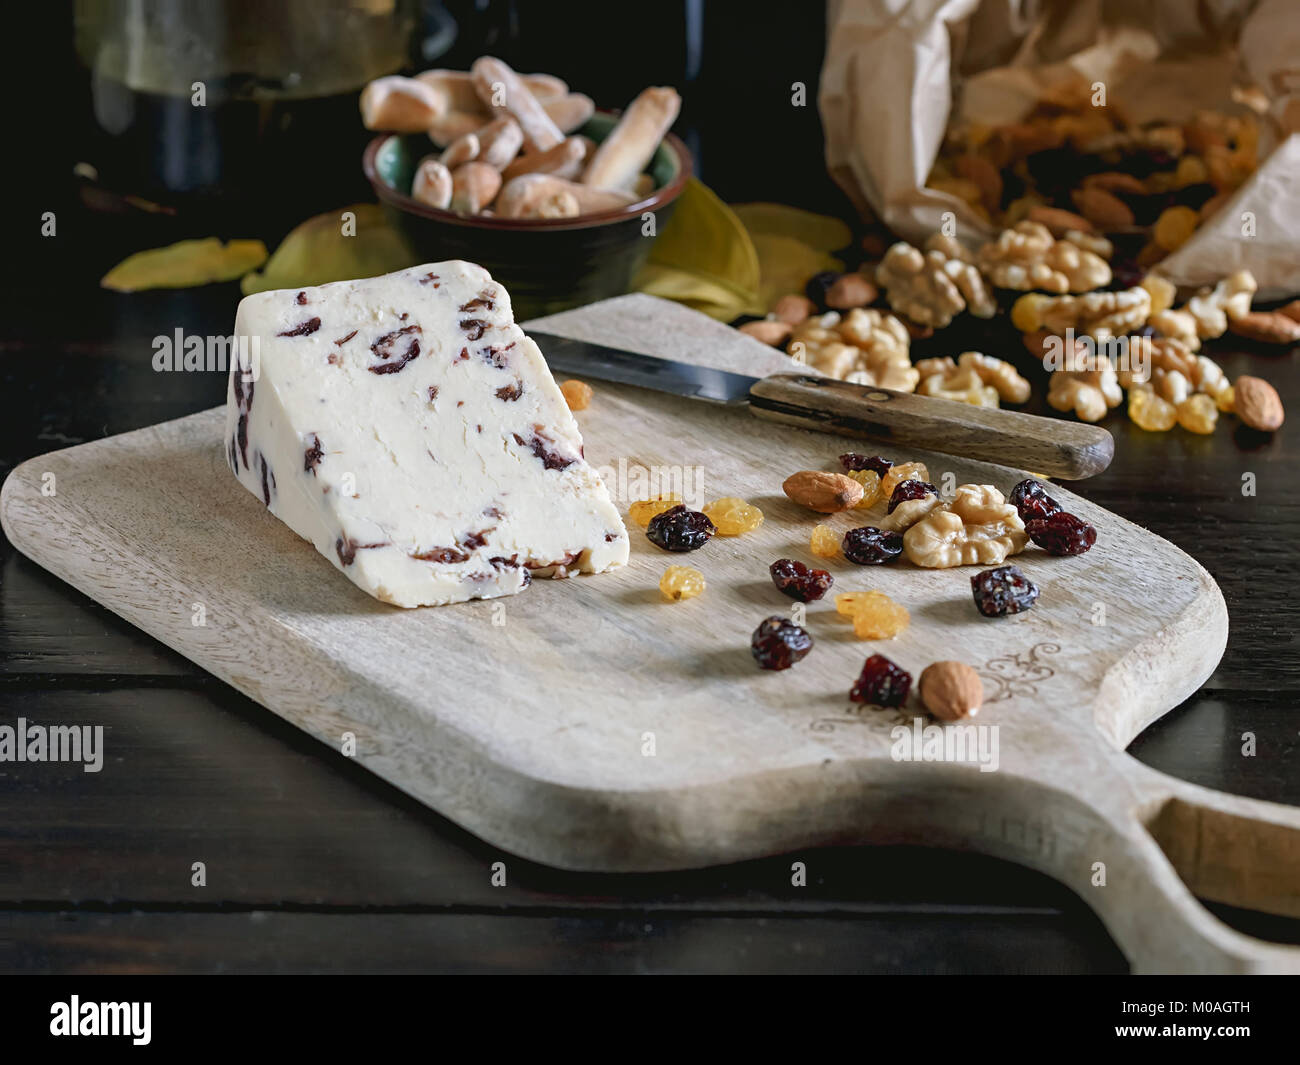 Creamery cheese with cranberries, nuts and raisins on wooden cutting board. Stock Photo